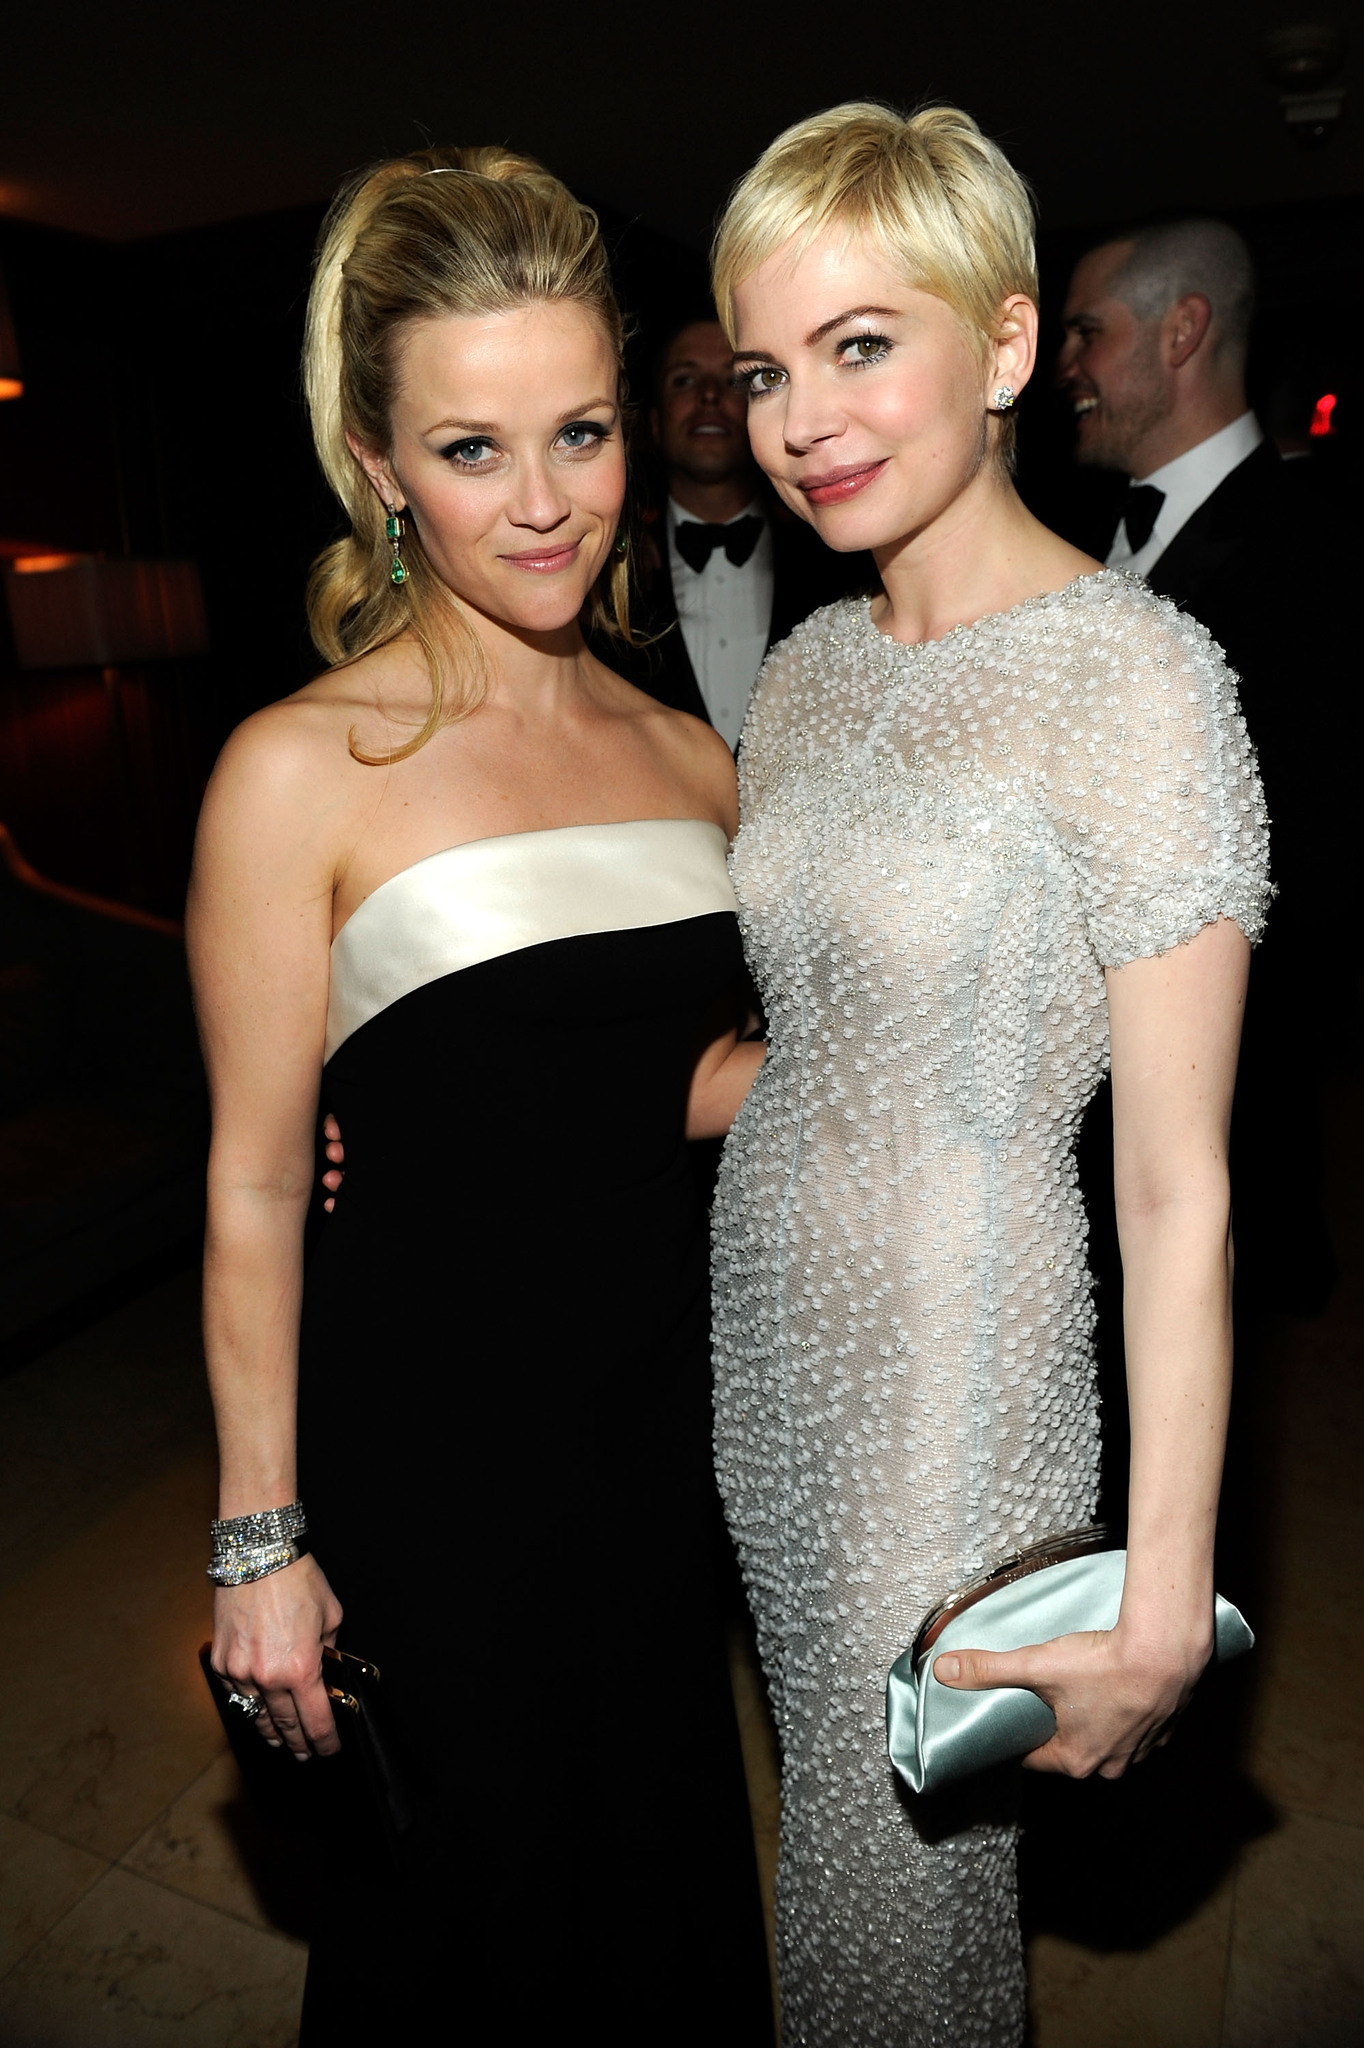 Reese Witherspoon and Michelle Williams